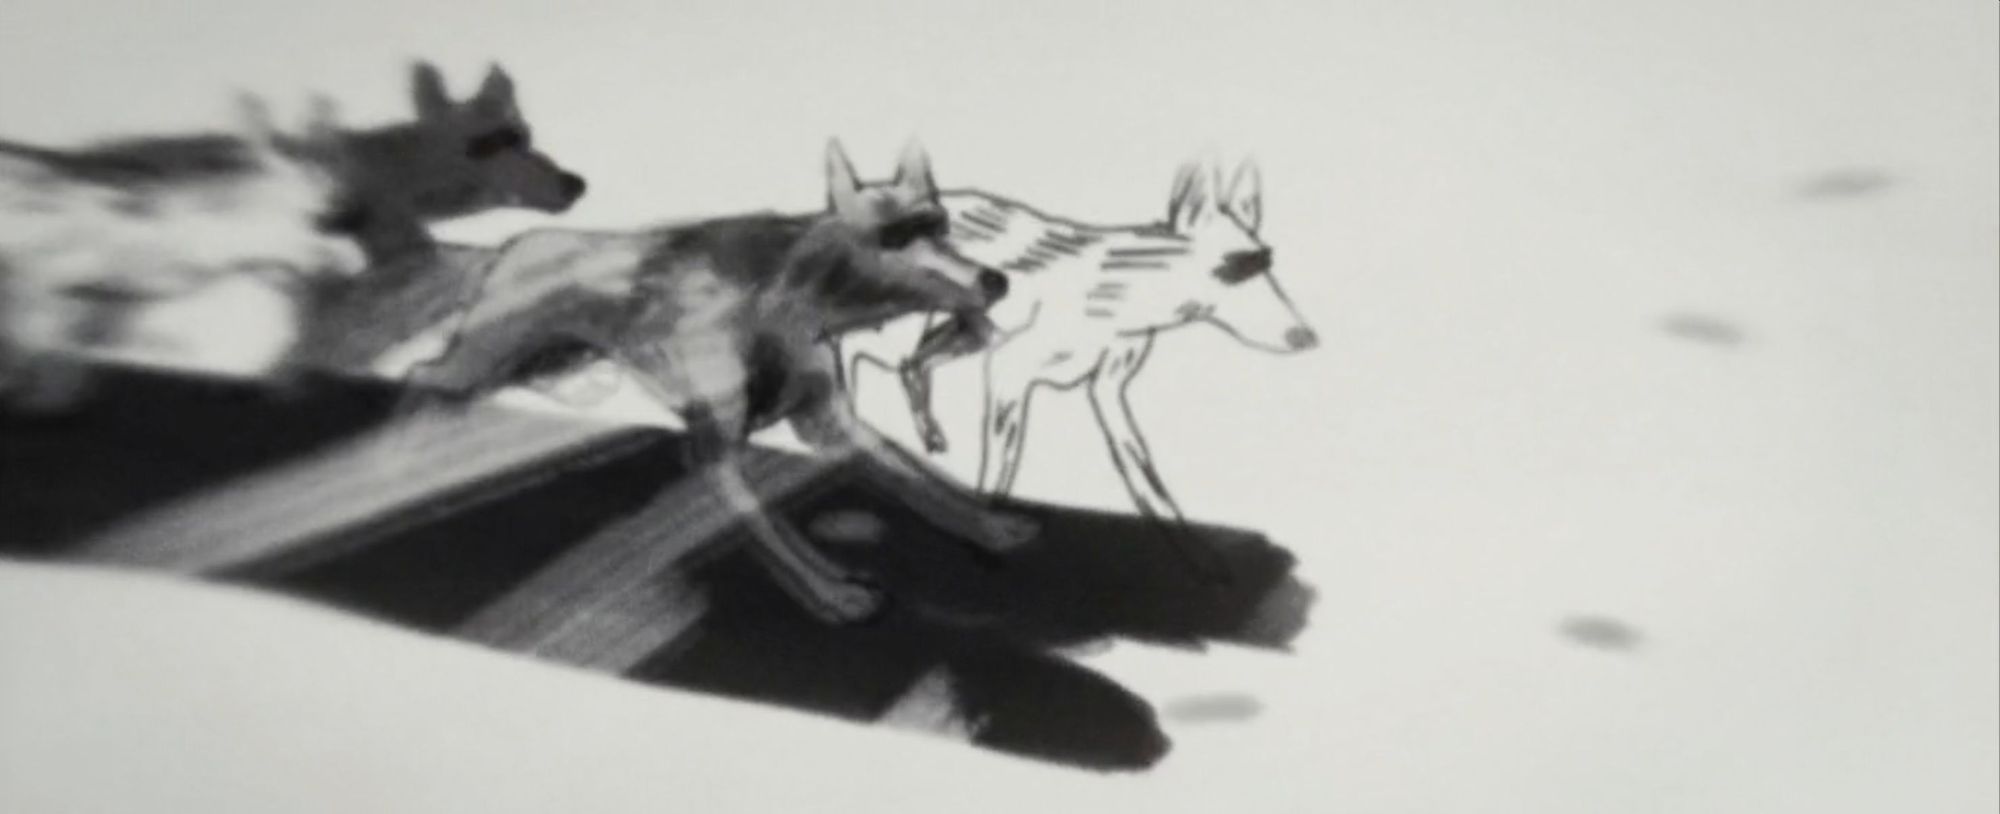 An animated image of dogs pulling Peter Freuchen's sledge, by Drew Christie.